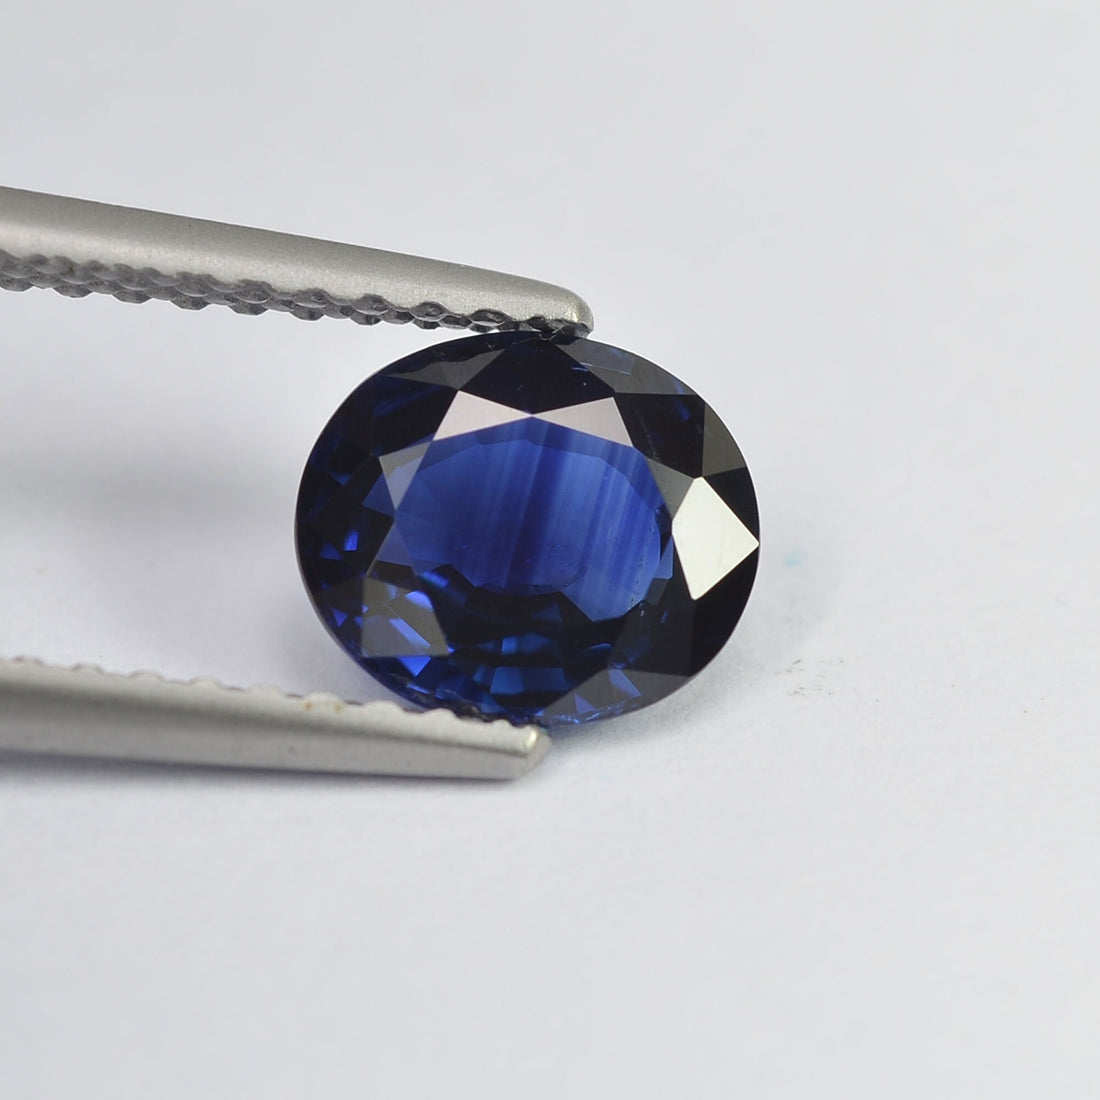 1.08 cts Natural Blue Sapphire Loose Gemstone Oval Cut Certified